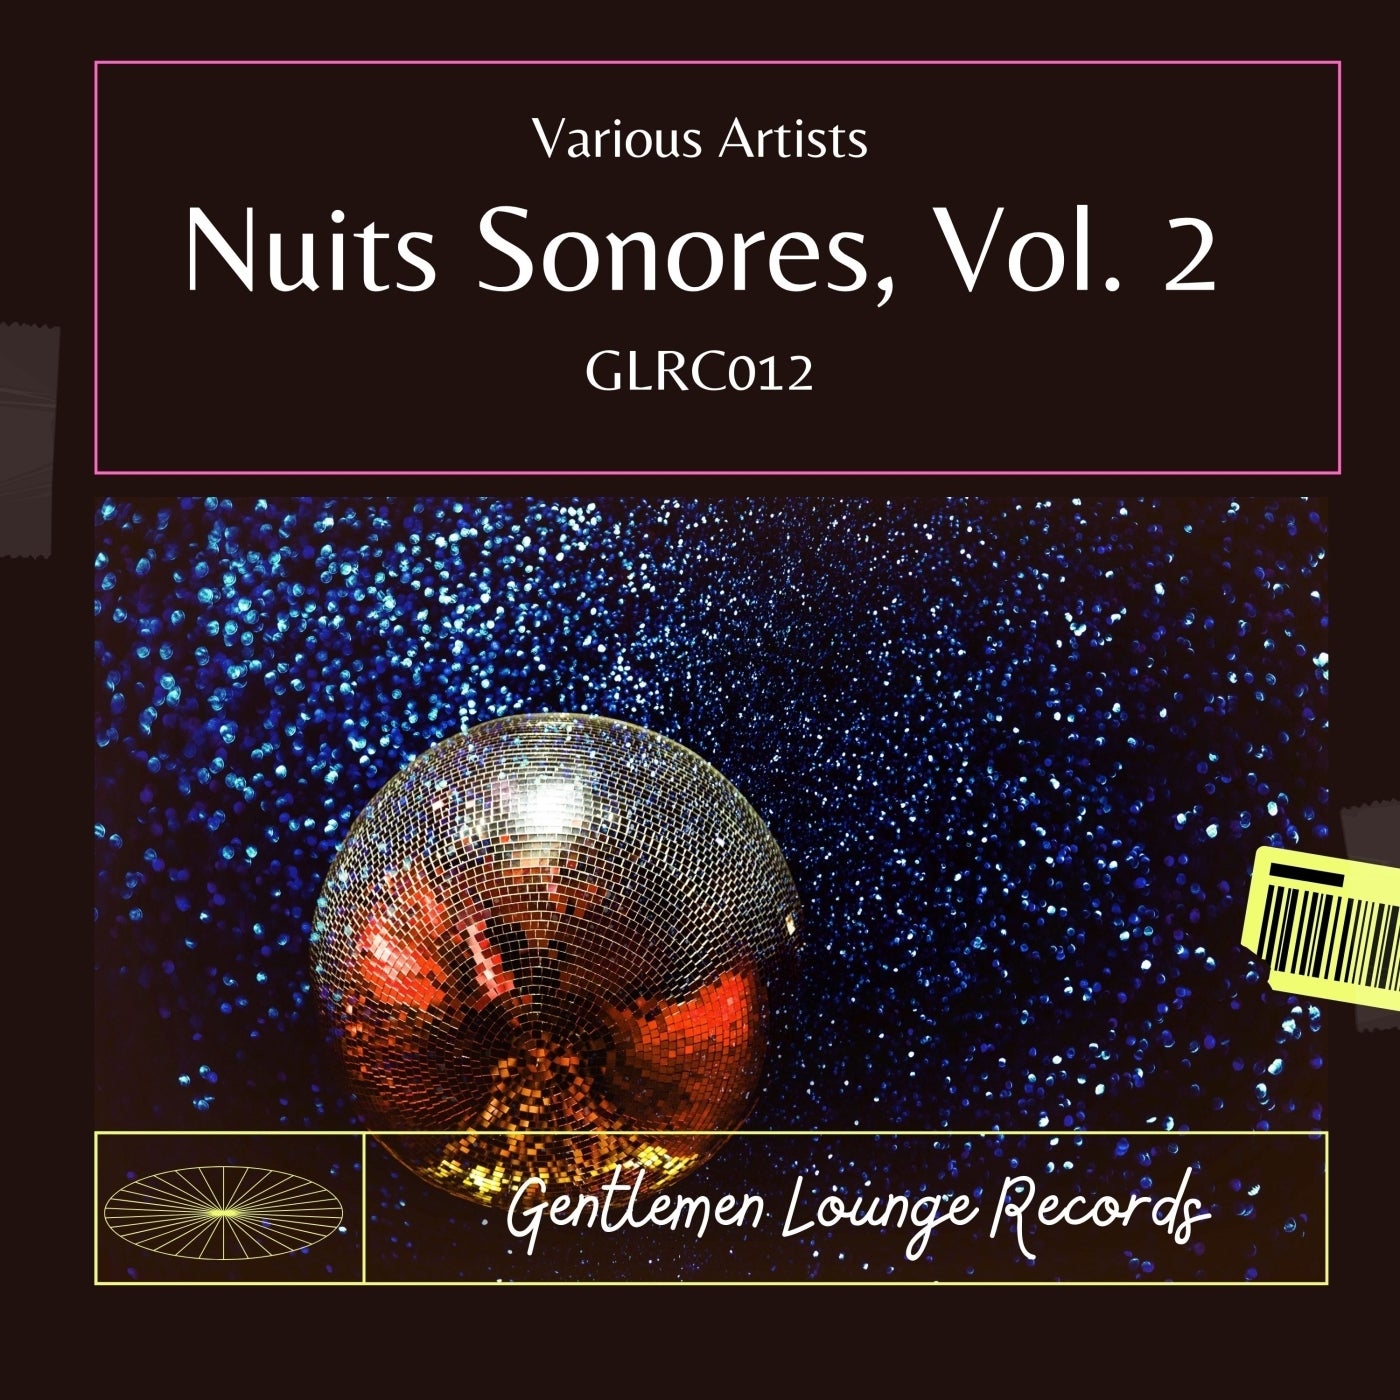 Nuits Sonores, Vol. 2